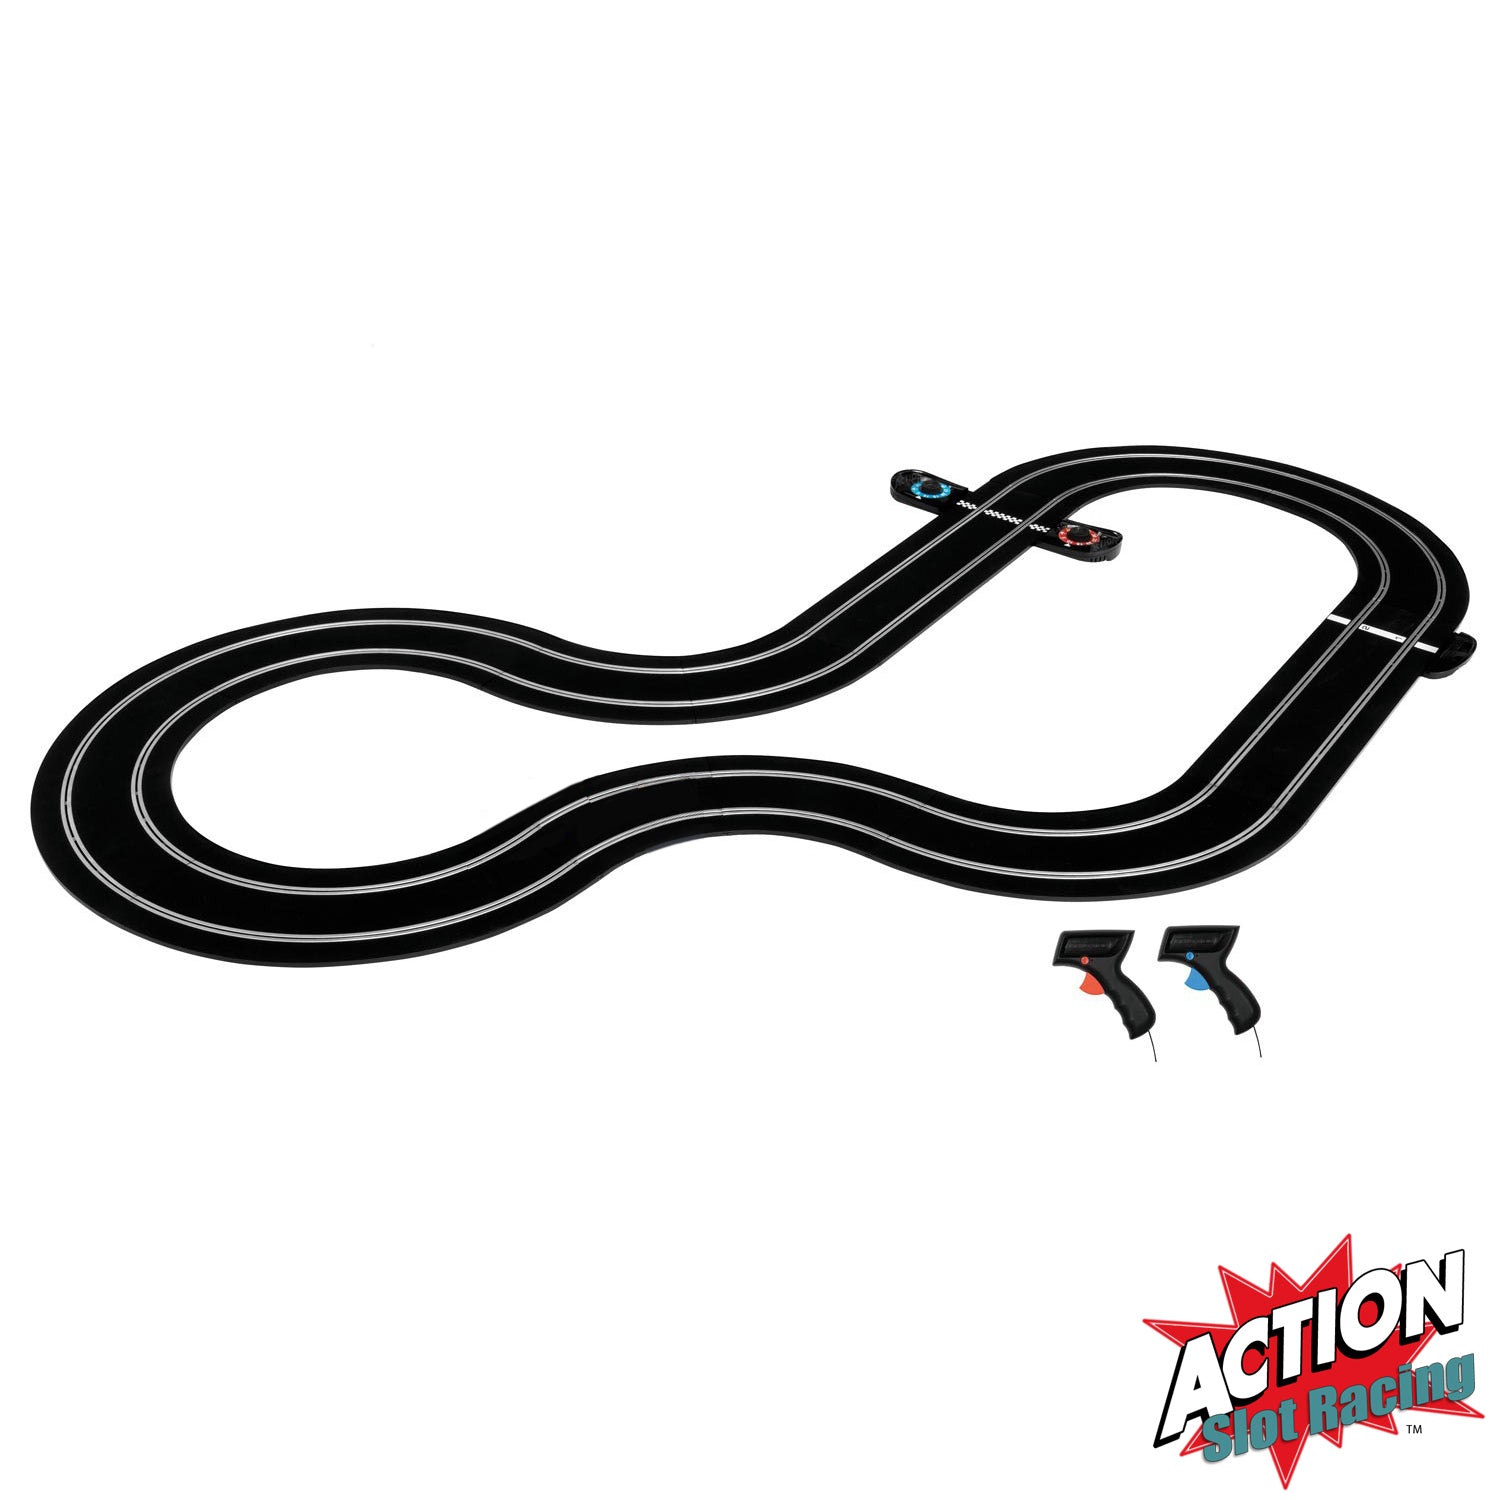 Scalextric Sport 1:32 Track Set - Layout With Lap Counter